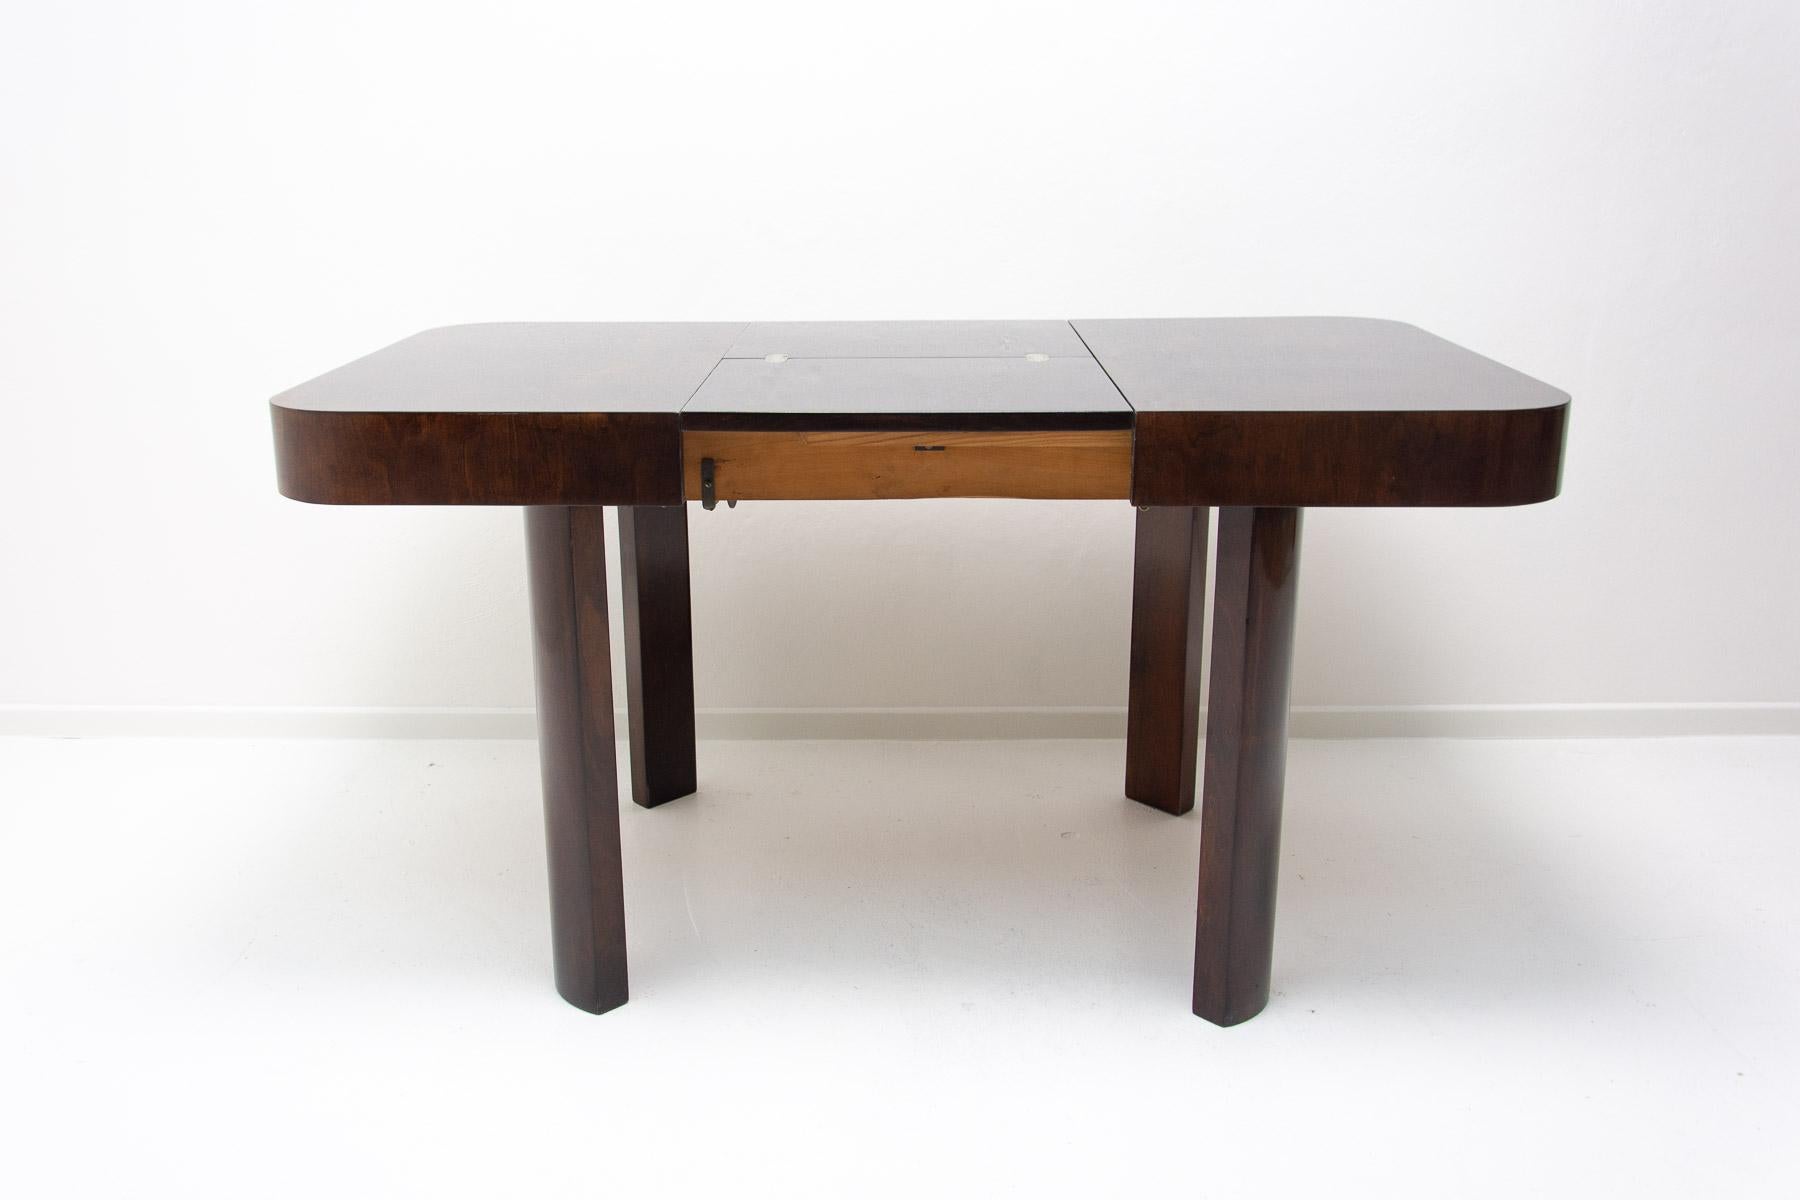  Midcentury Fully renovated adjustable walnut dining table by Jindrich Halabala. 6